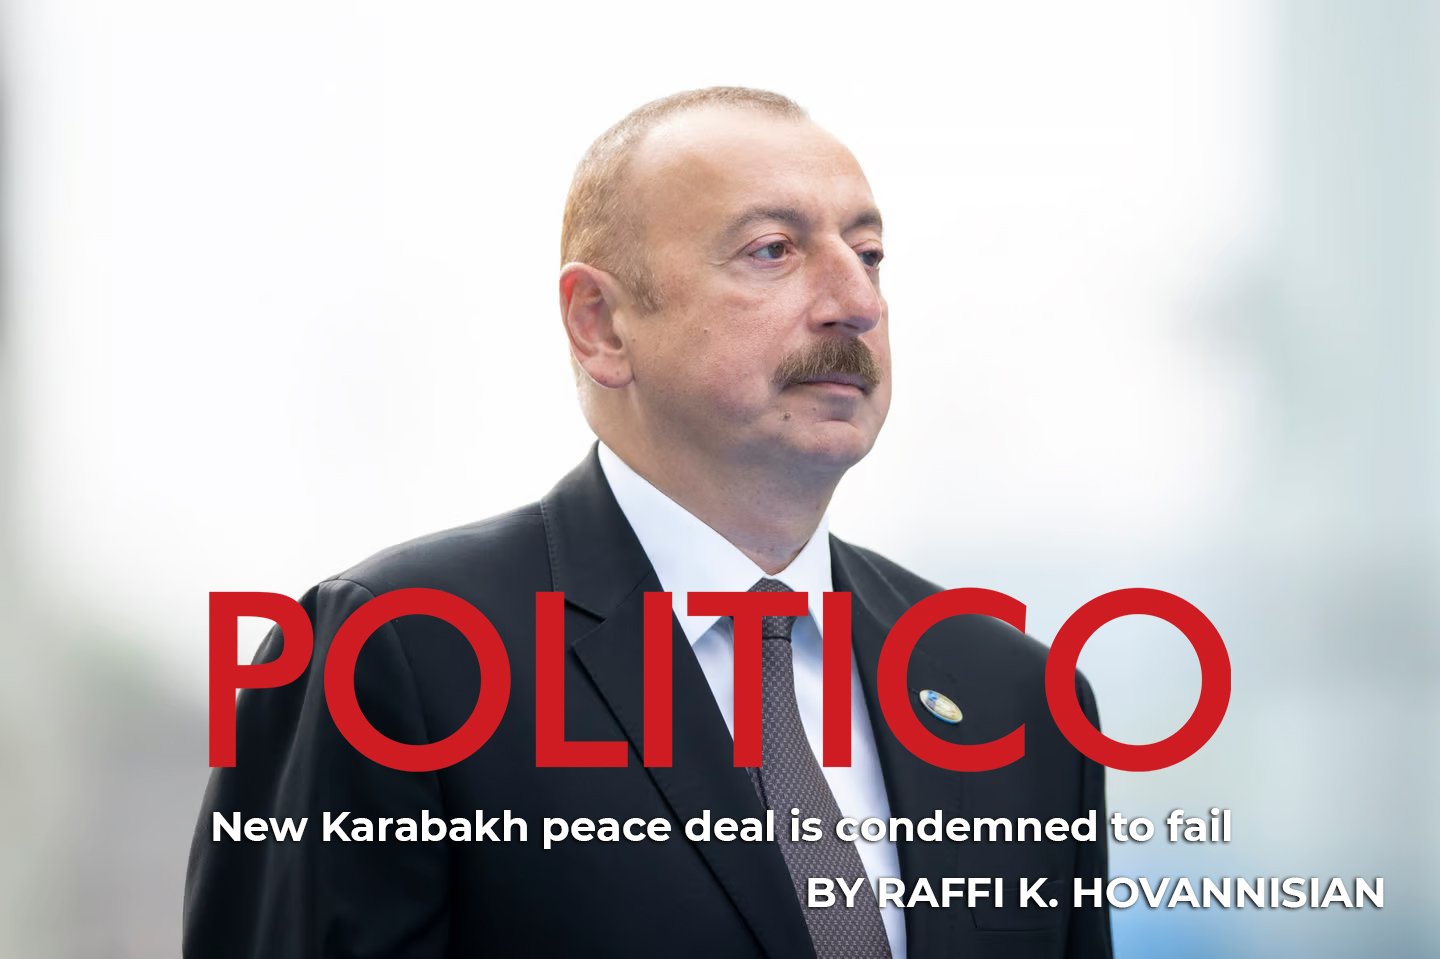 New Karabakh peace deal is condemned to fail